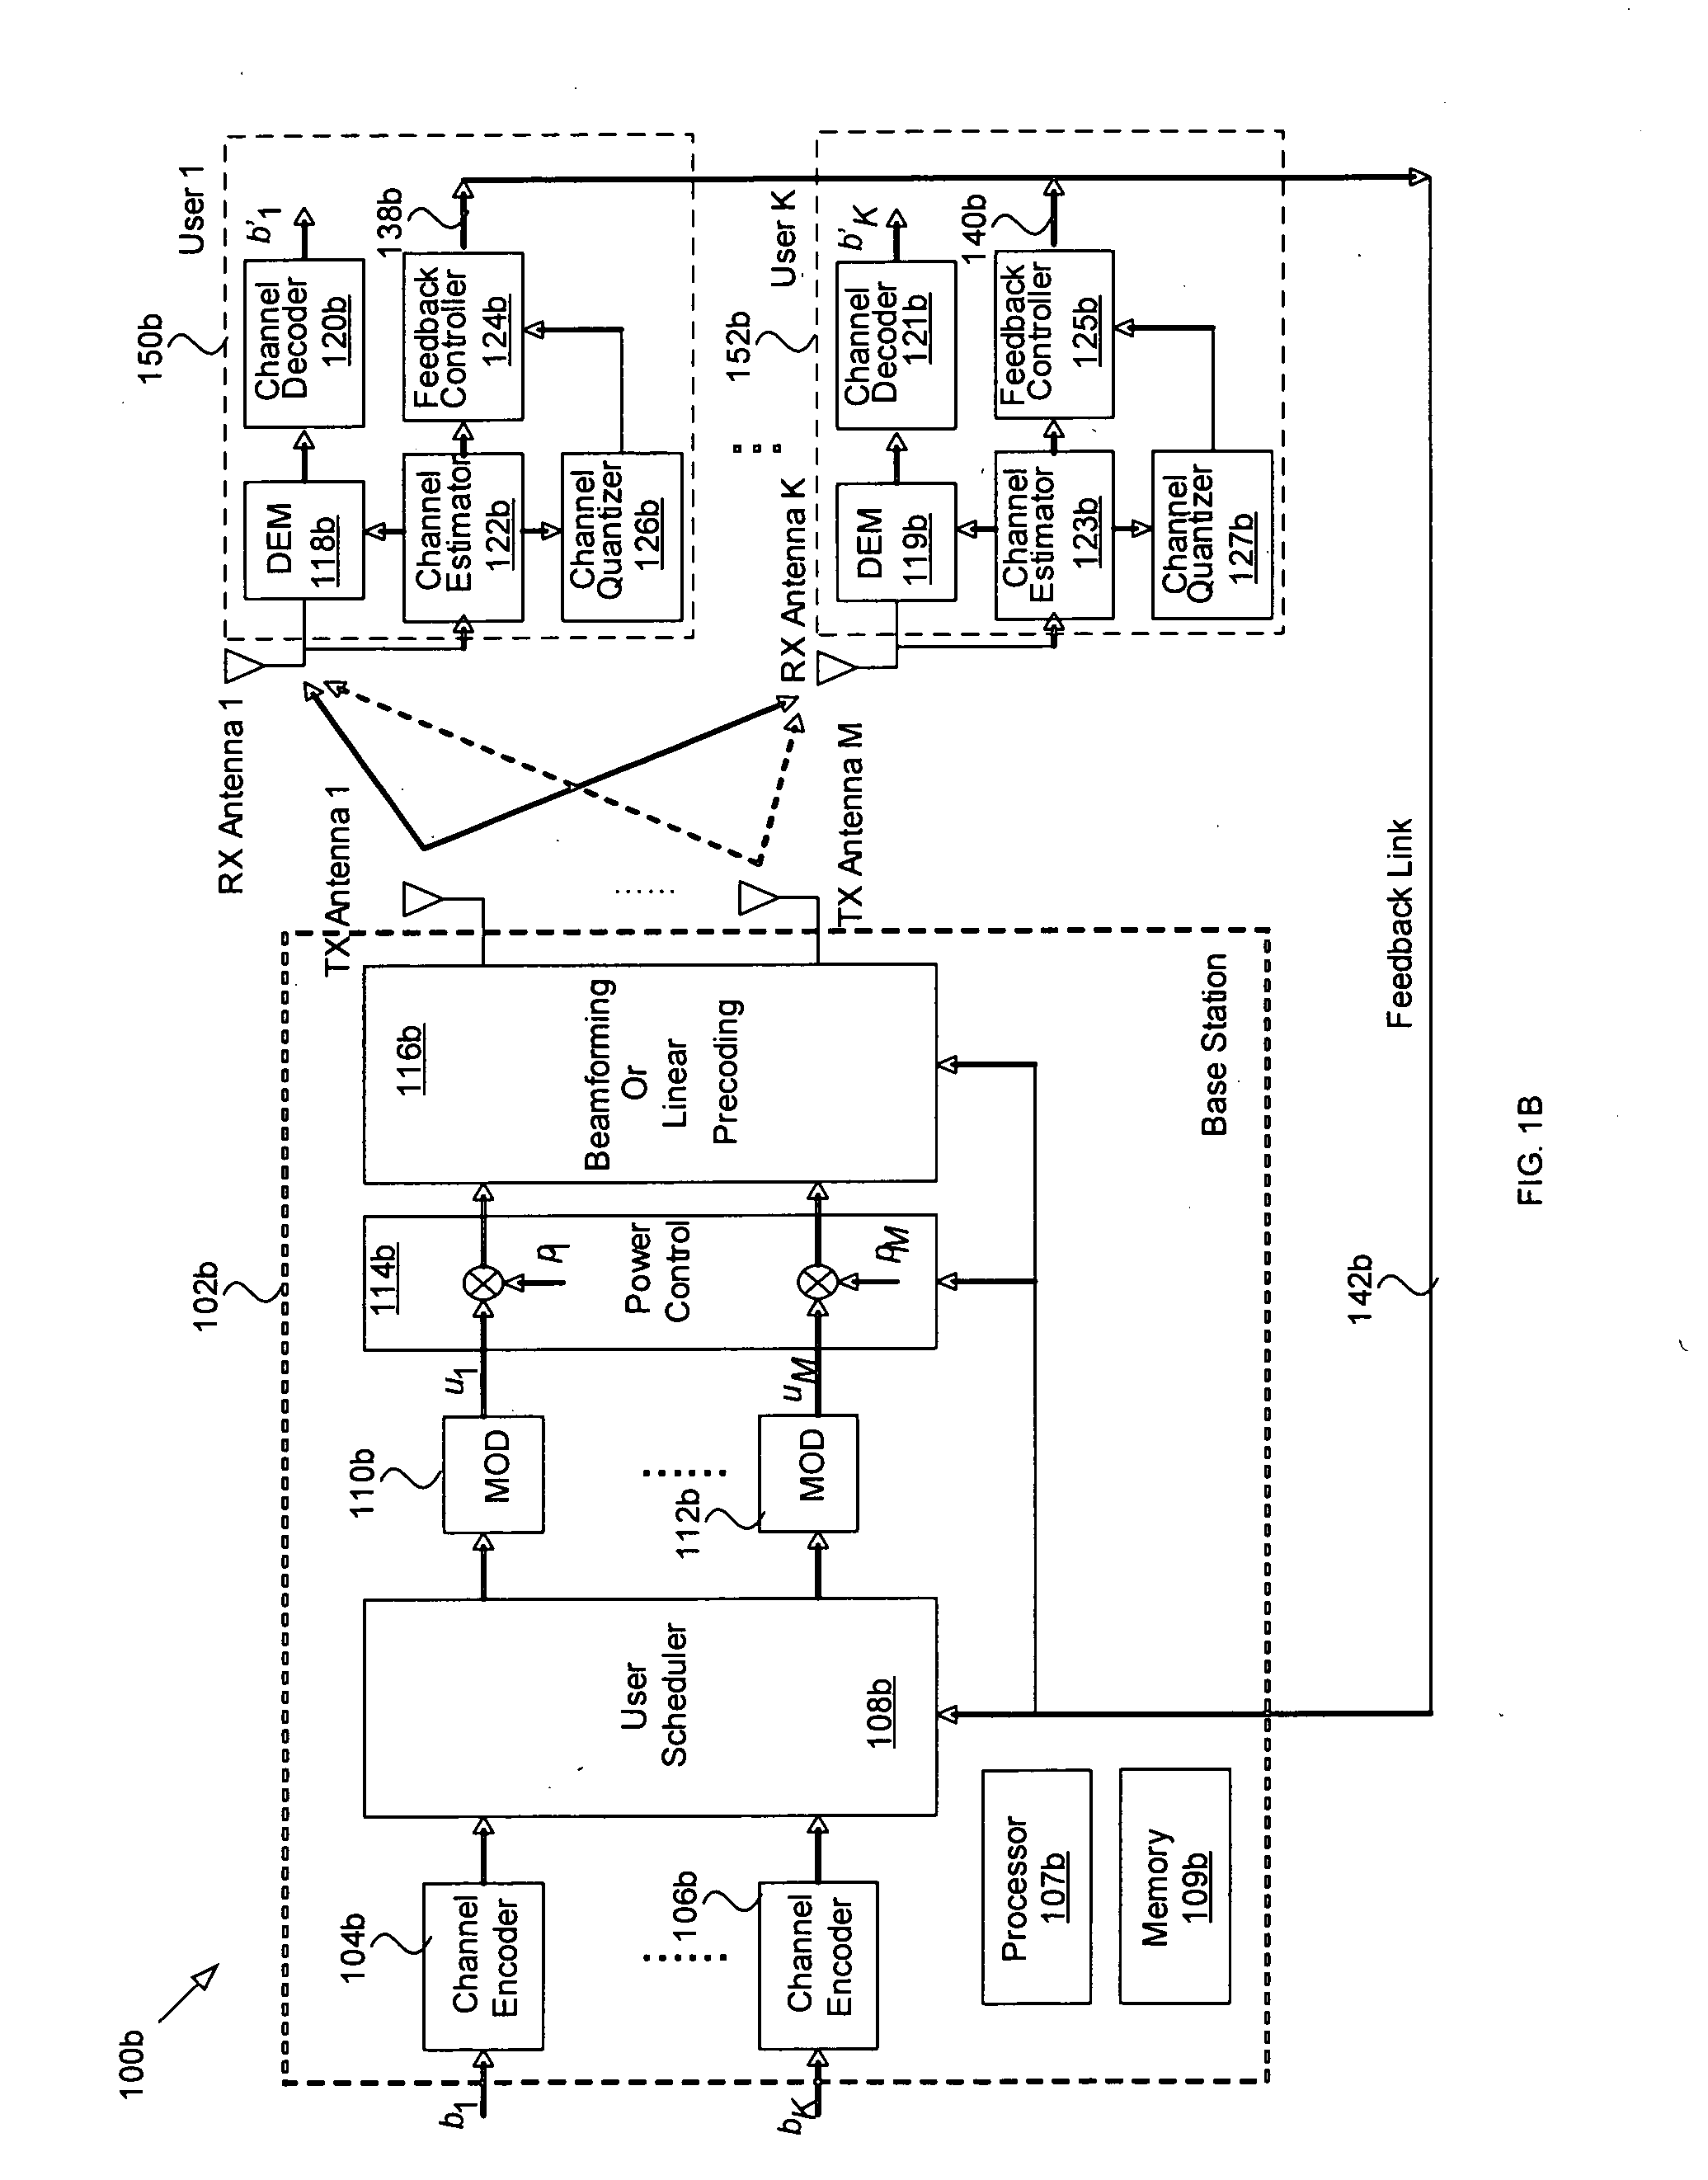 Method and system for a simplified user group selection scheme with finite-rate channel state information feedback for FDD multiuser MIMO downlink transmission